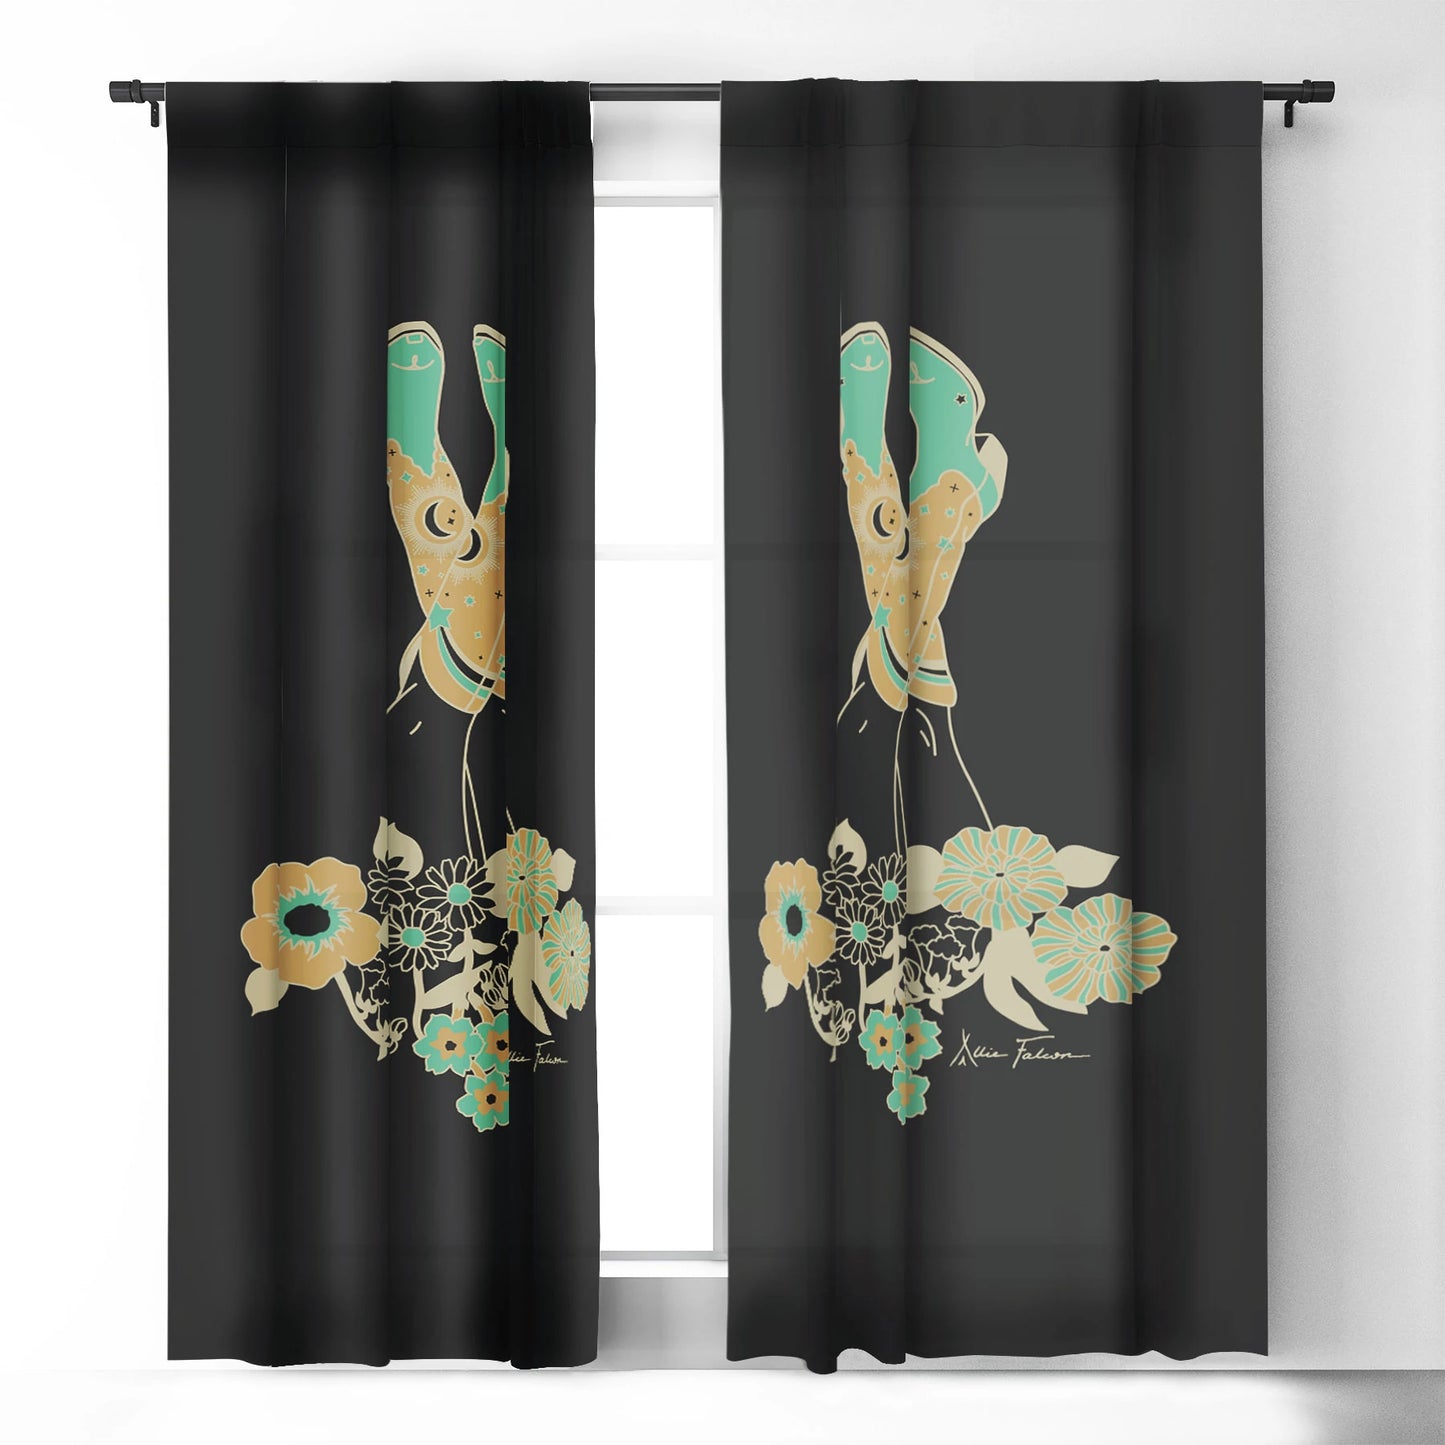 Turquoise Cowgirl Curtain Panel